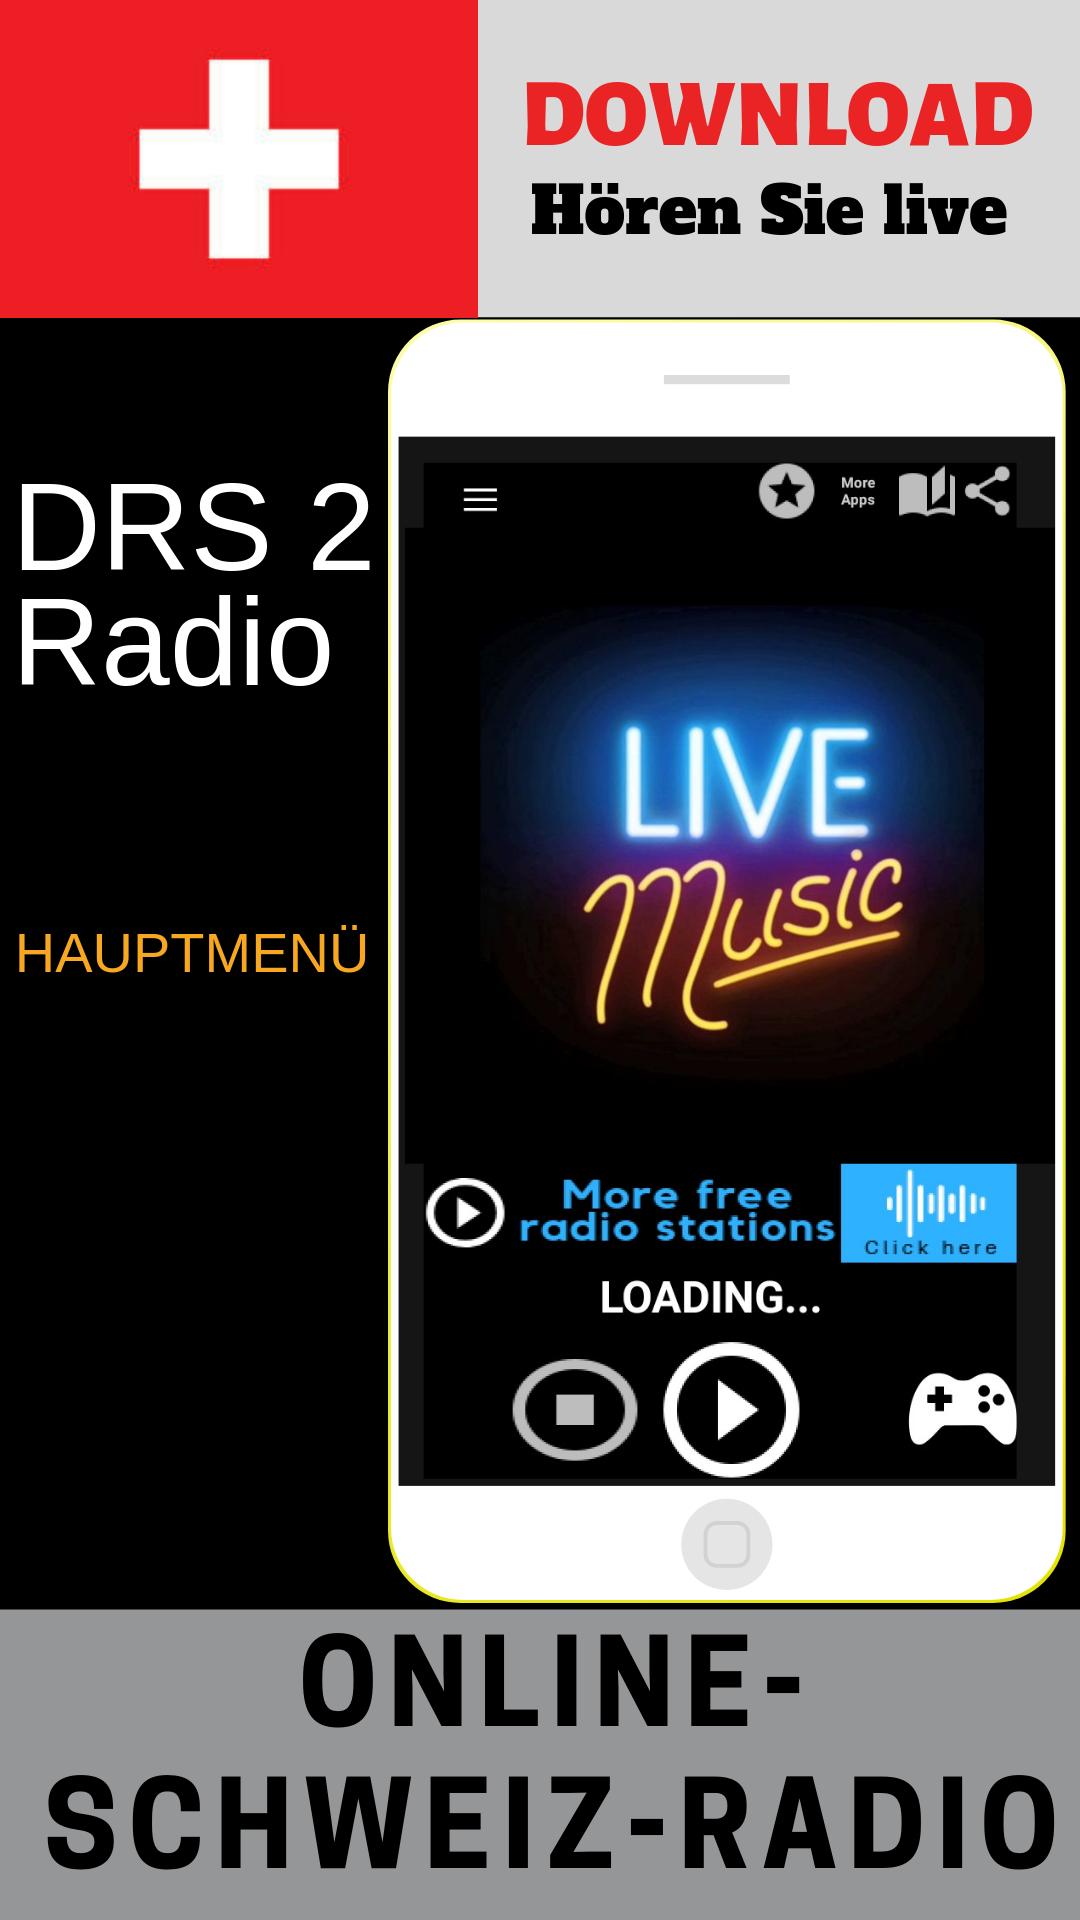 DRS 3 Radio Free Online for Android - APK Download